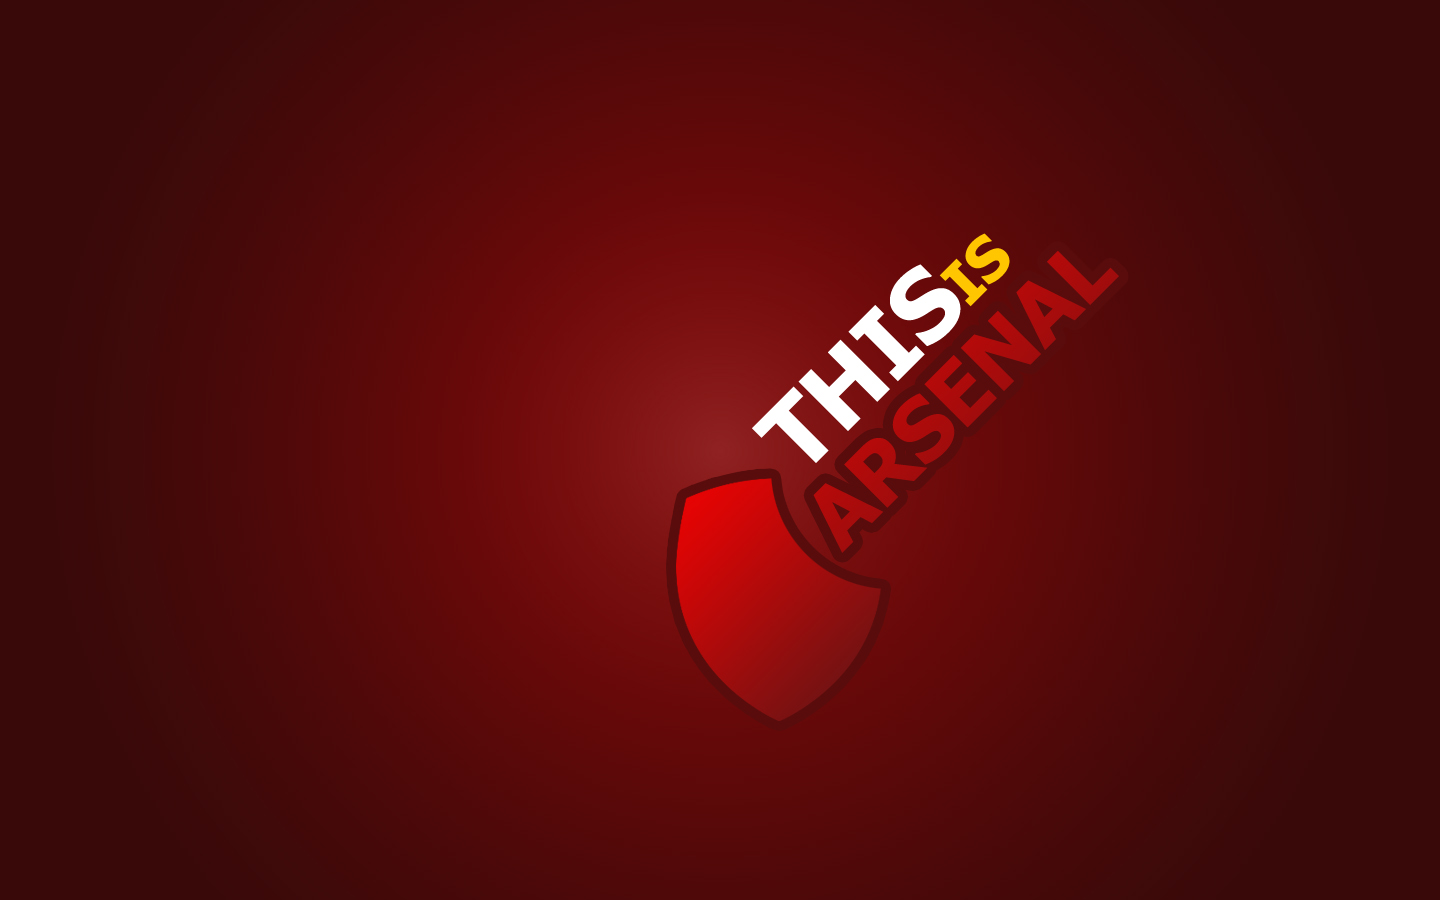 Arsenal Wallpapers,wallpaper logo,image,pictures,HD,wallpapers